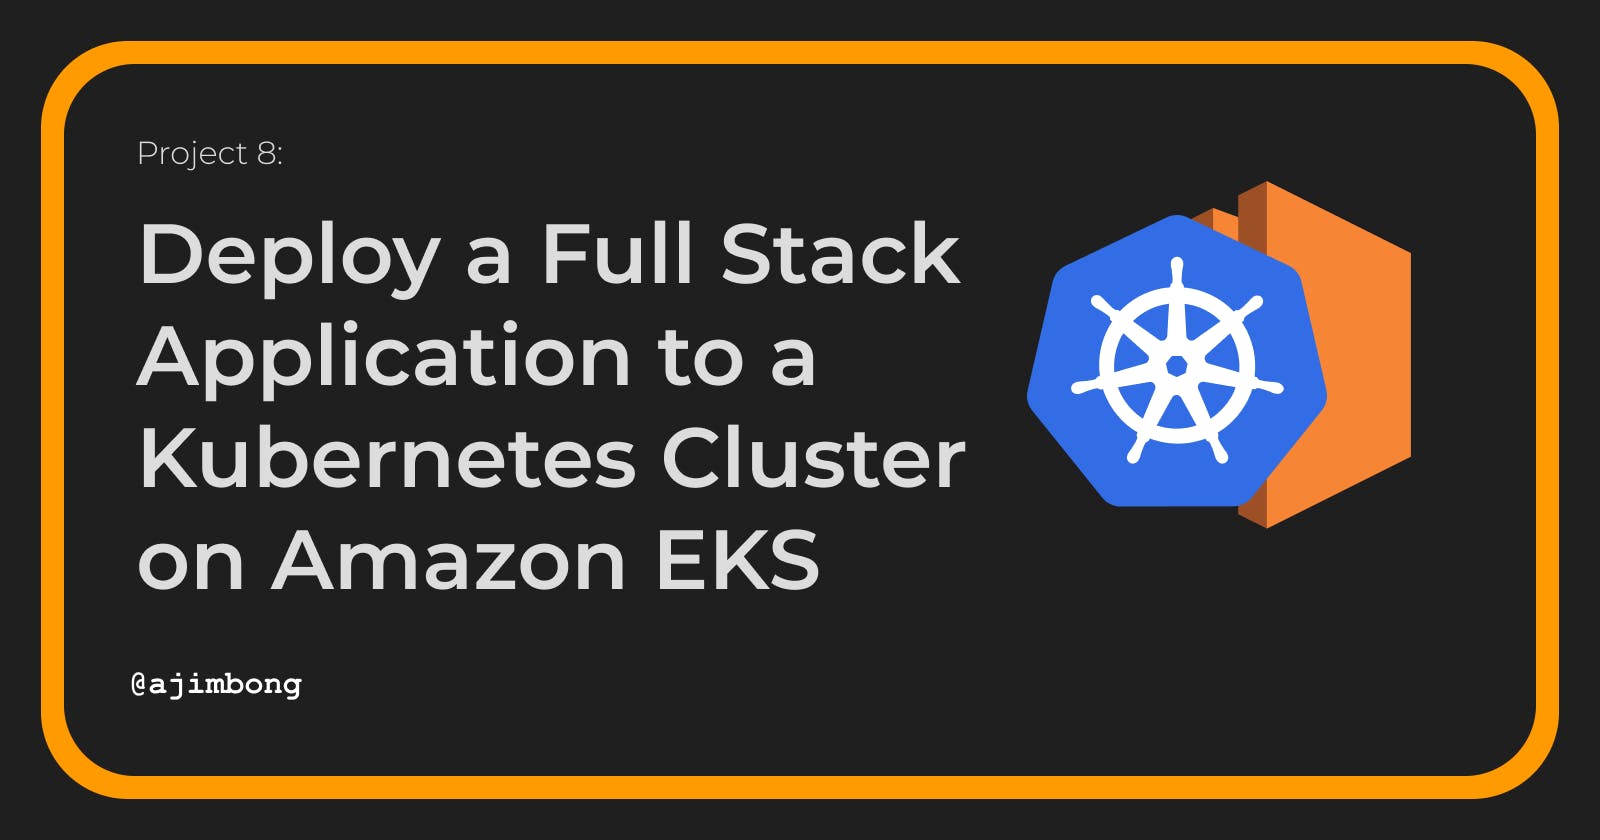 Deploy a Full Stack Application to a Kubernetes Cluster on Amazon EKS